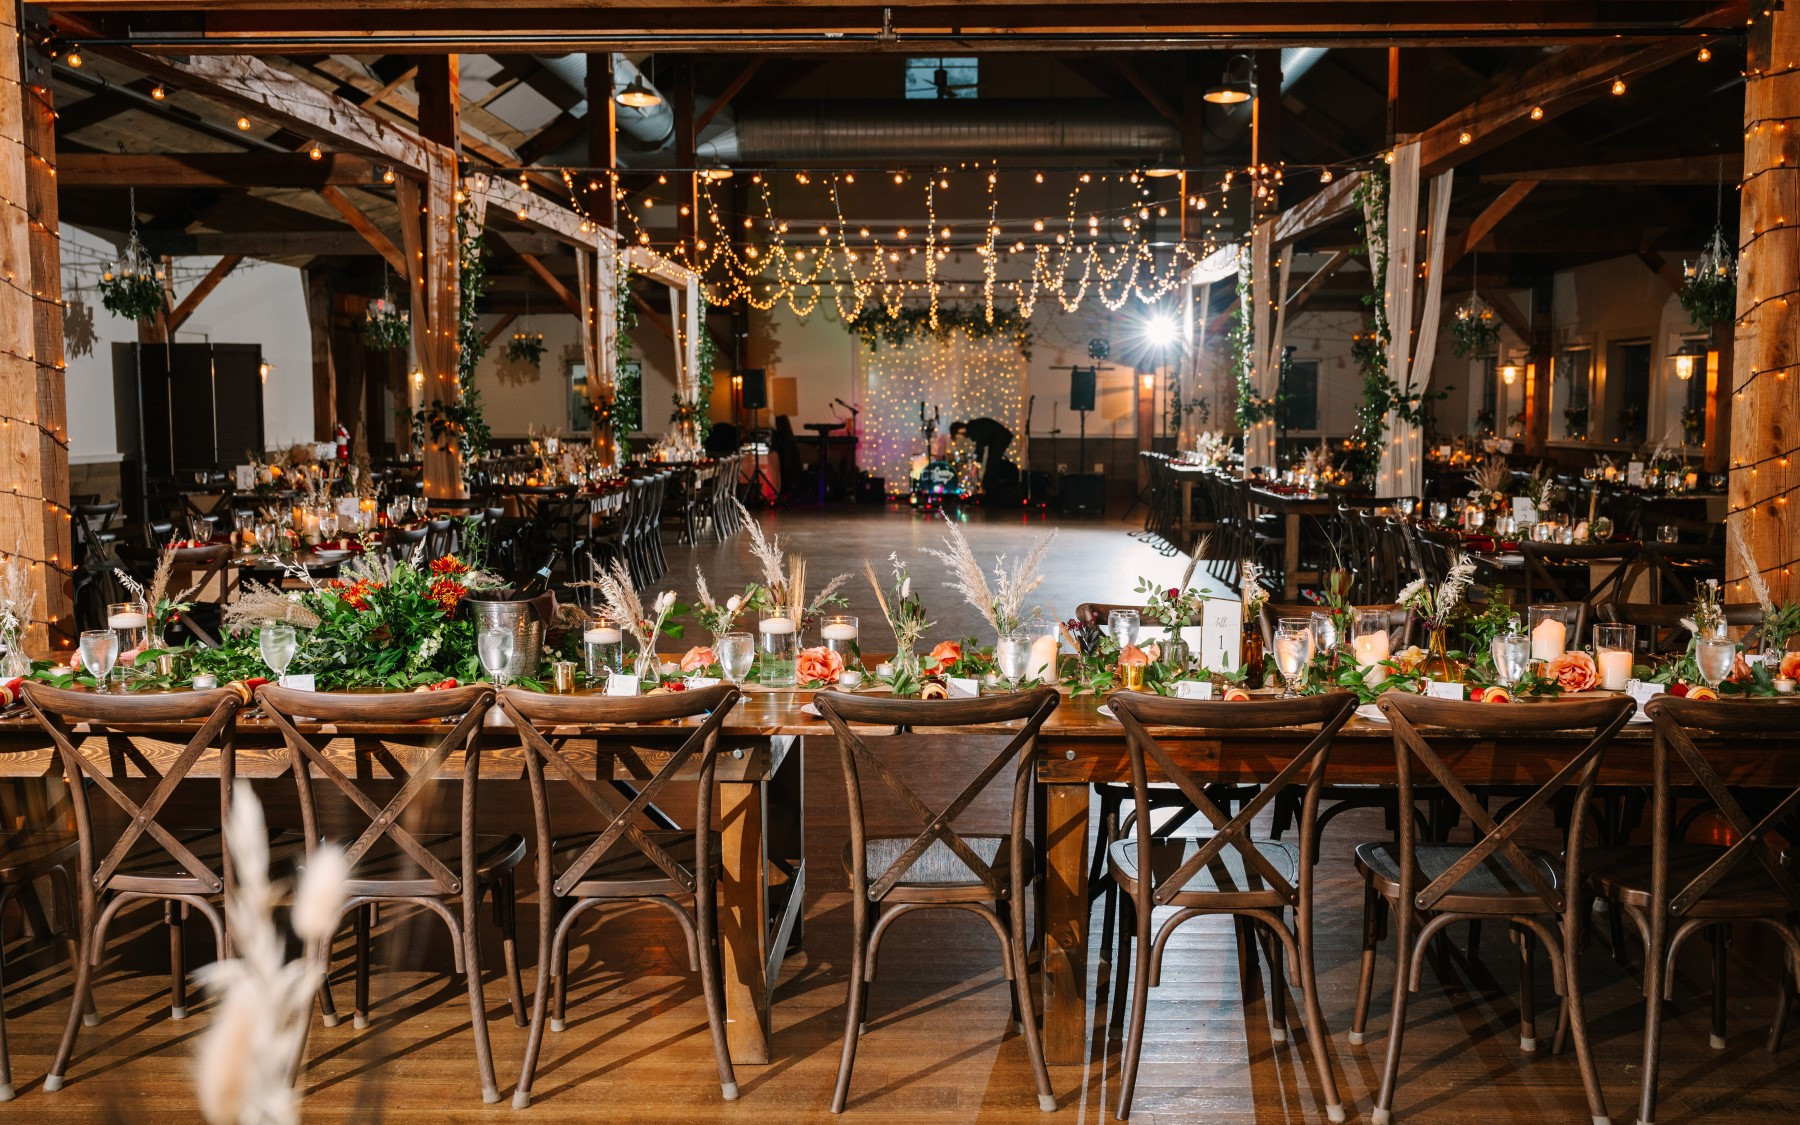 event barn set up for a fall wedding showcasing the dance floor.